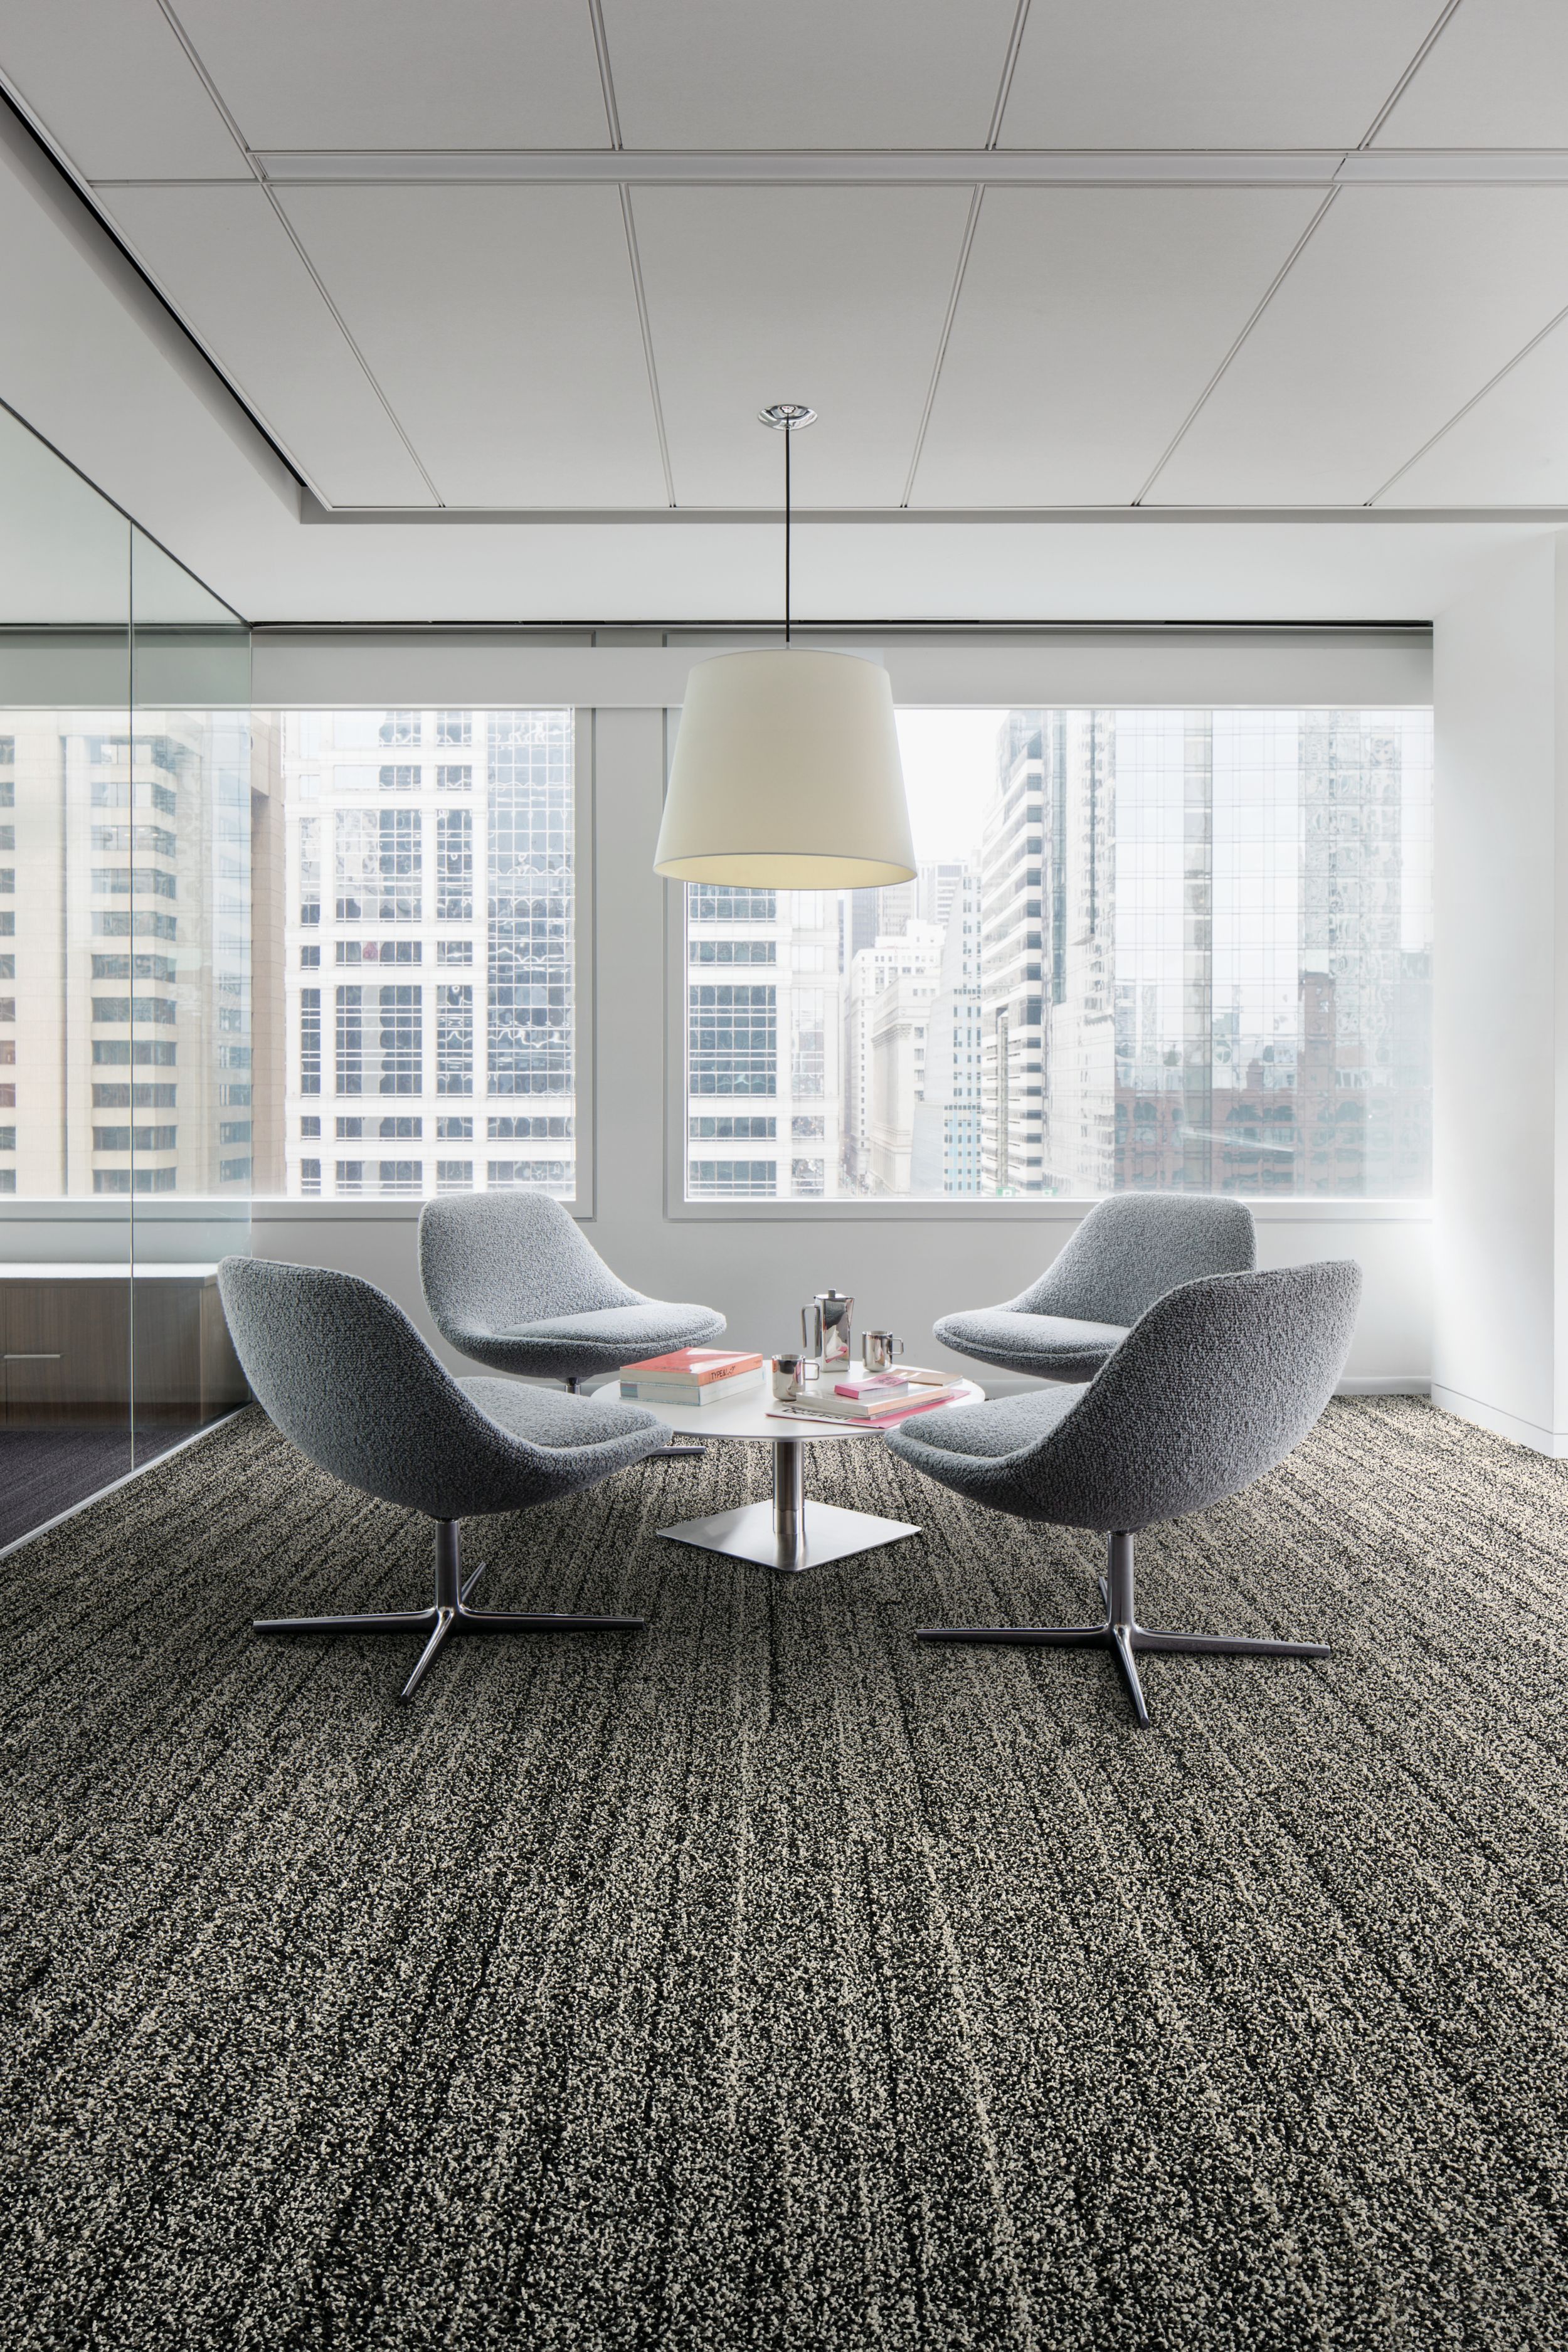 Interface Overedge plank carpet tile with fabric chairs around round table image number 6